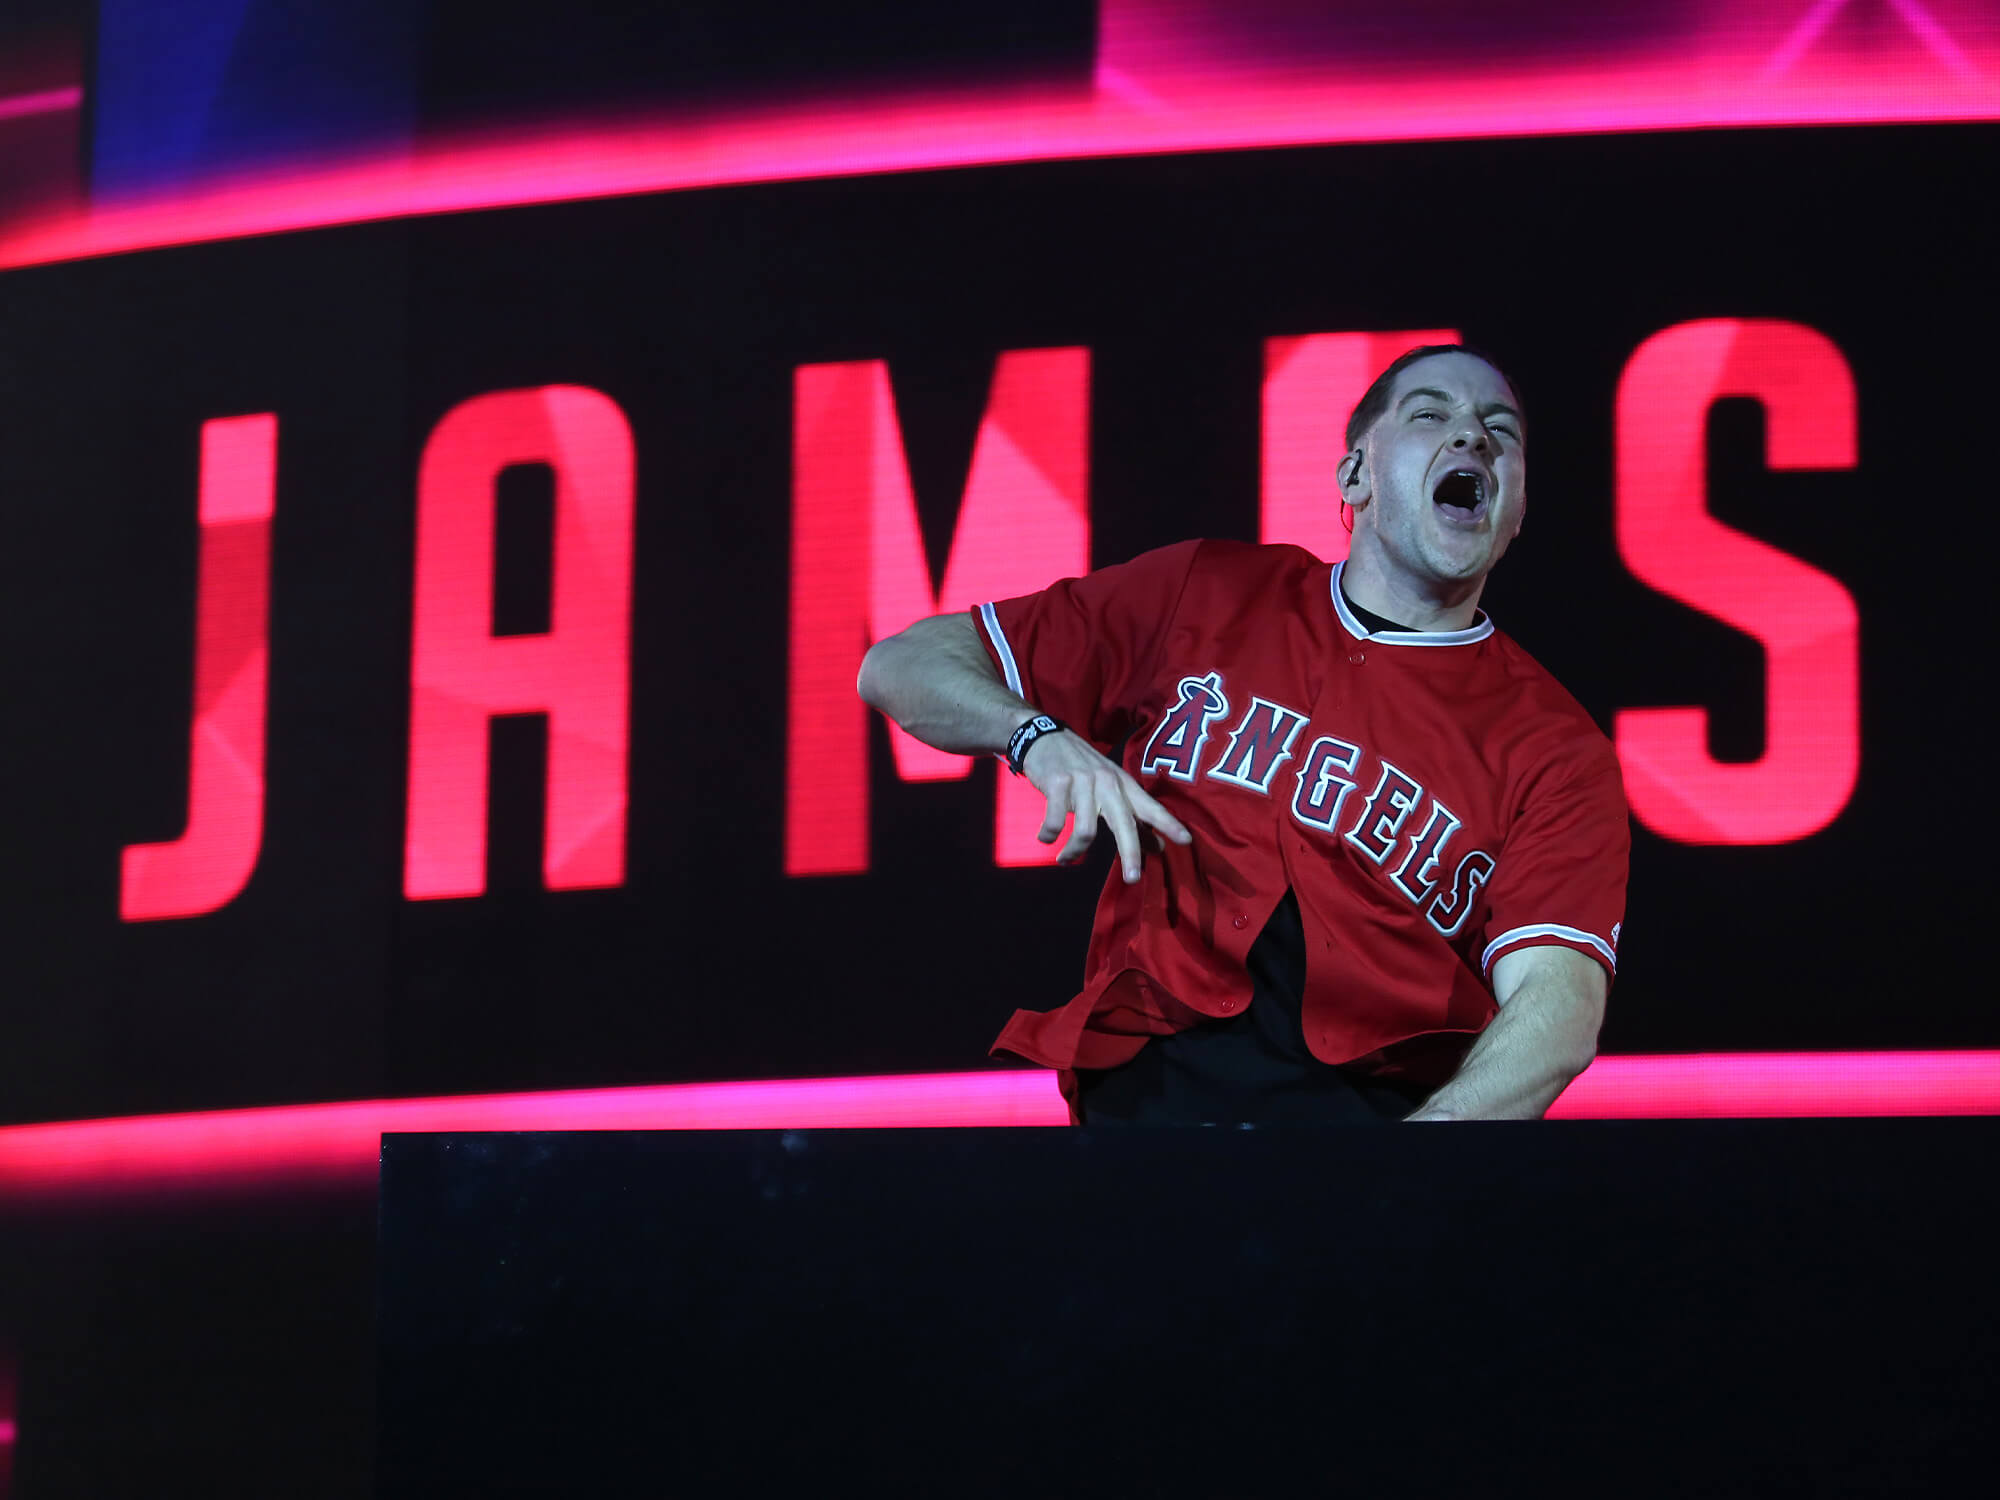 James Hype on stage. He is behind the decks, is jumping in the air and is shouting out to the crowd. His name is lit up in red behind him.